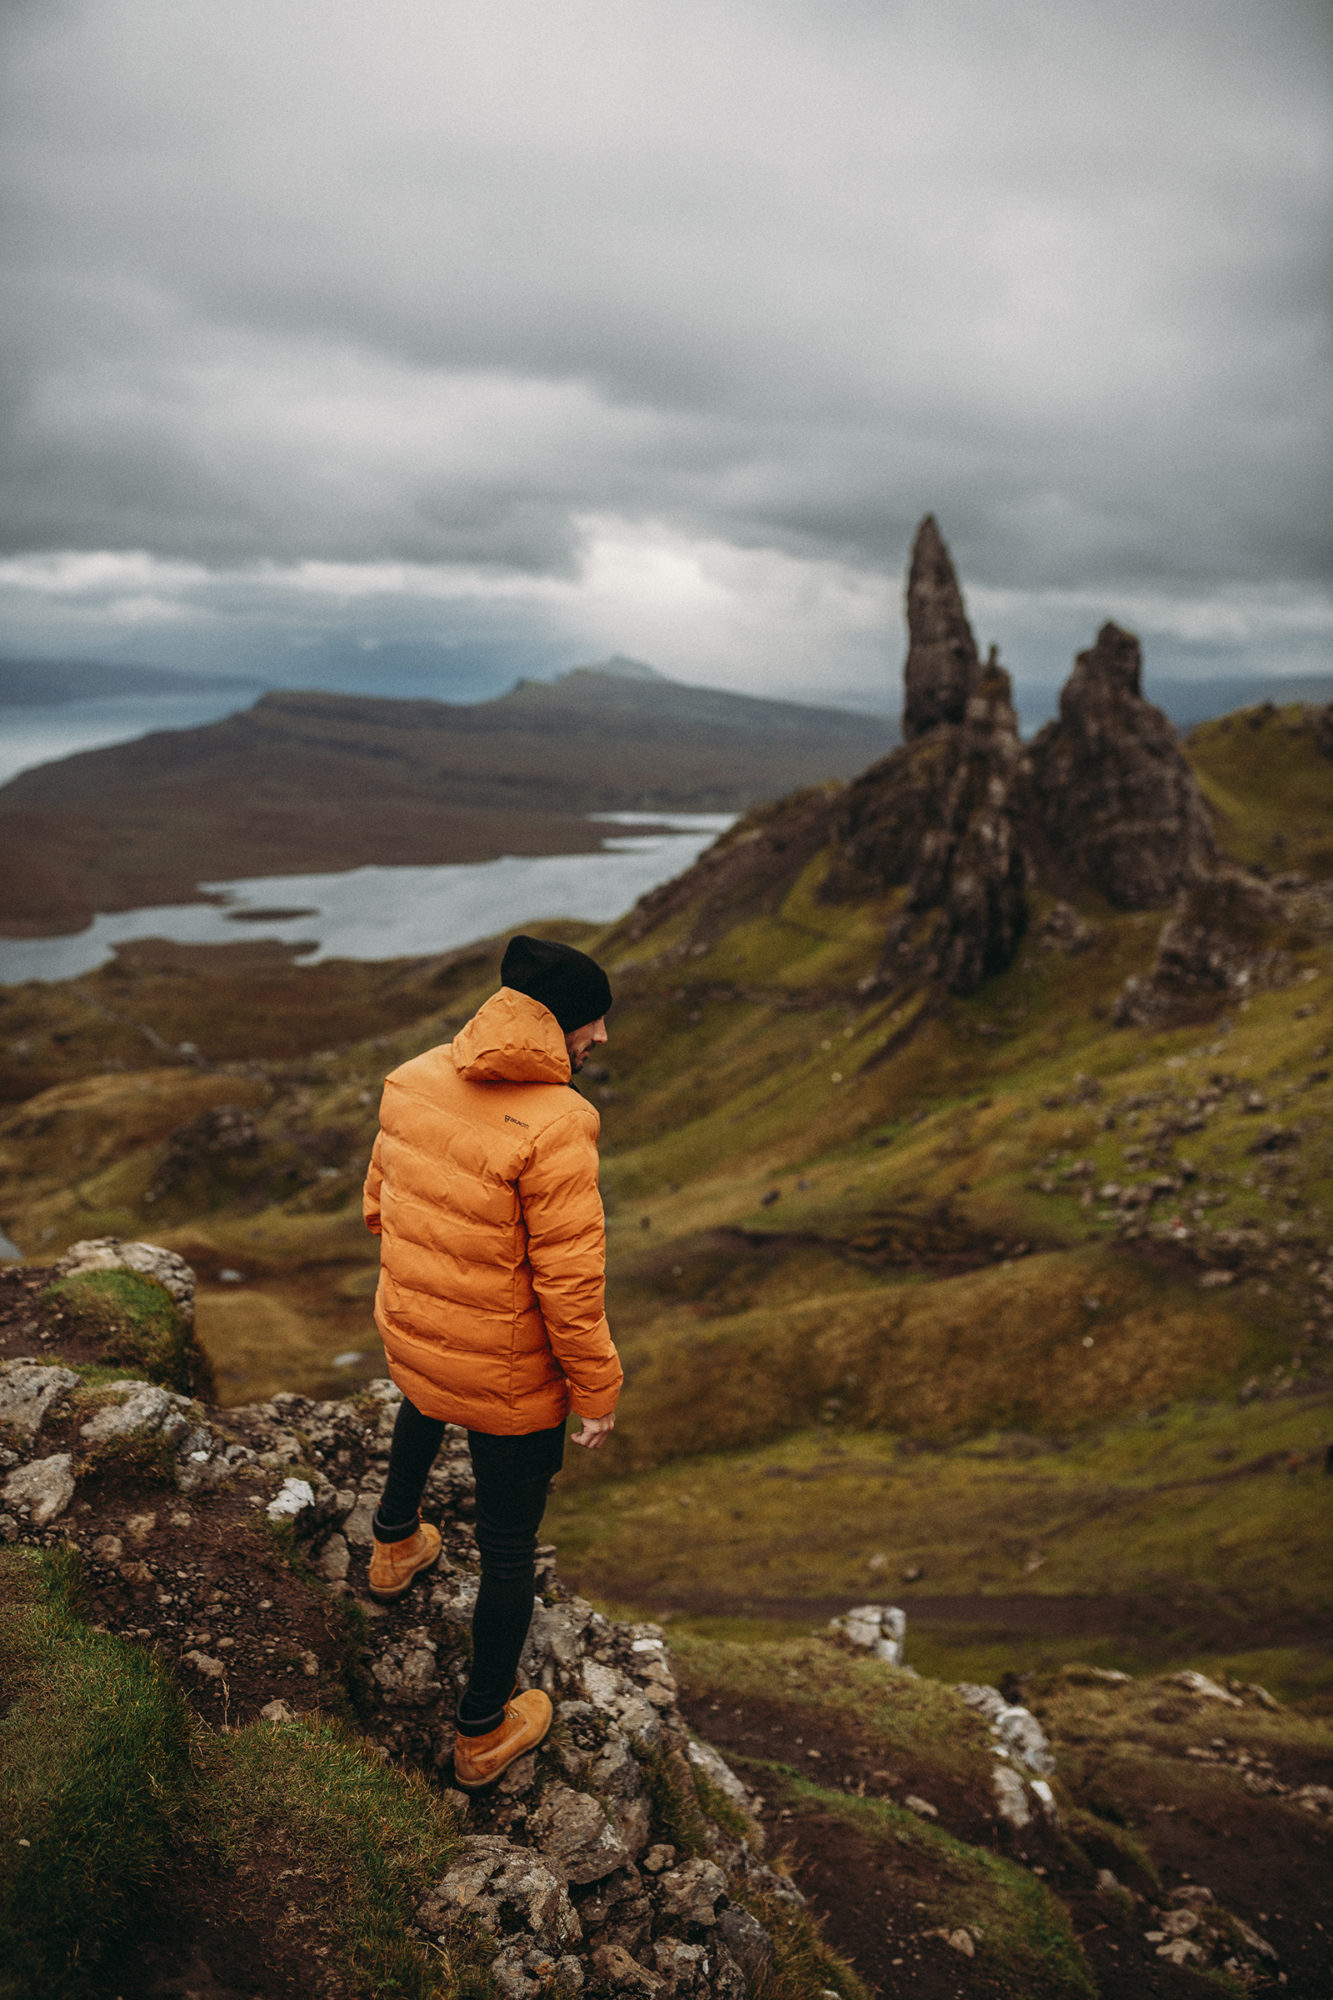 TheKiteMag 50 The Mission The Storr by Orestis Zoumpos scaled - The Mission: Scottish Power